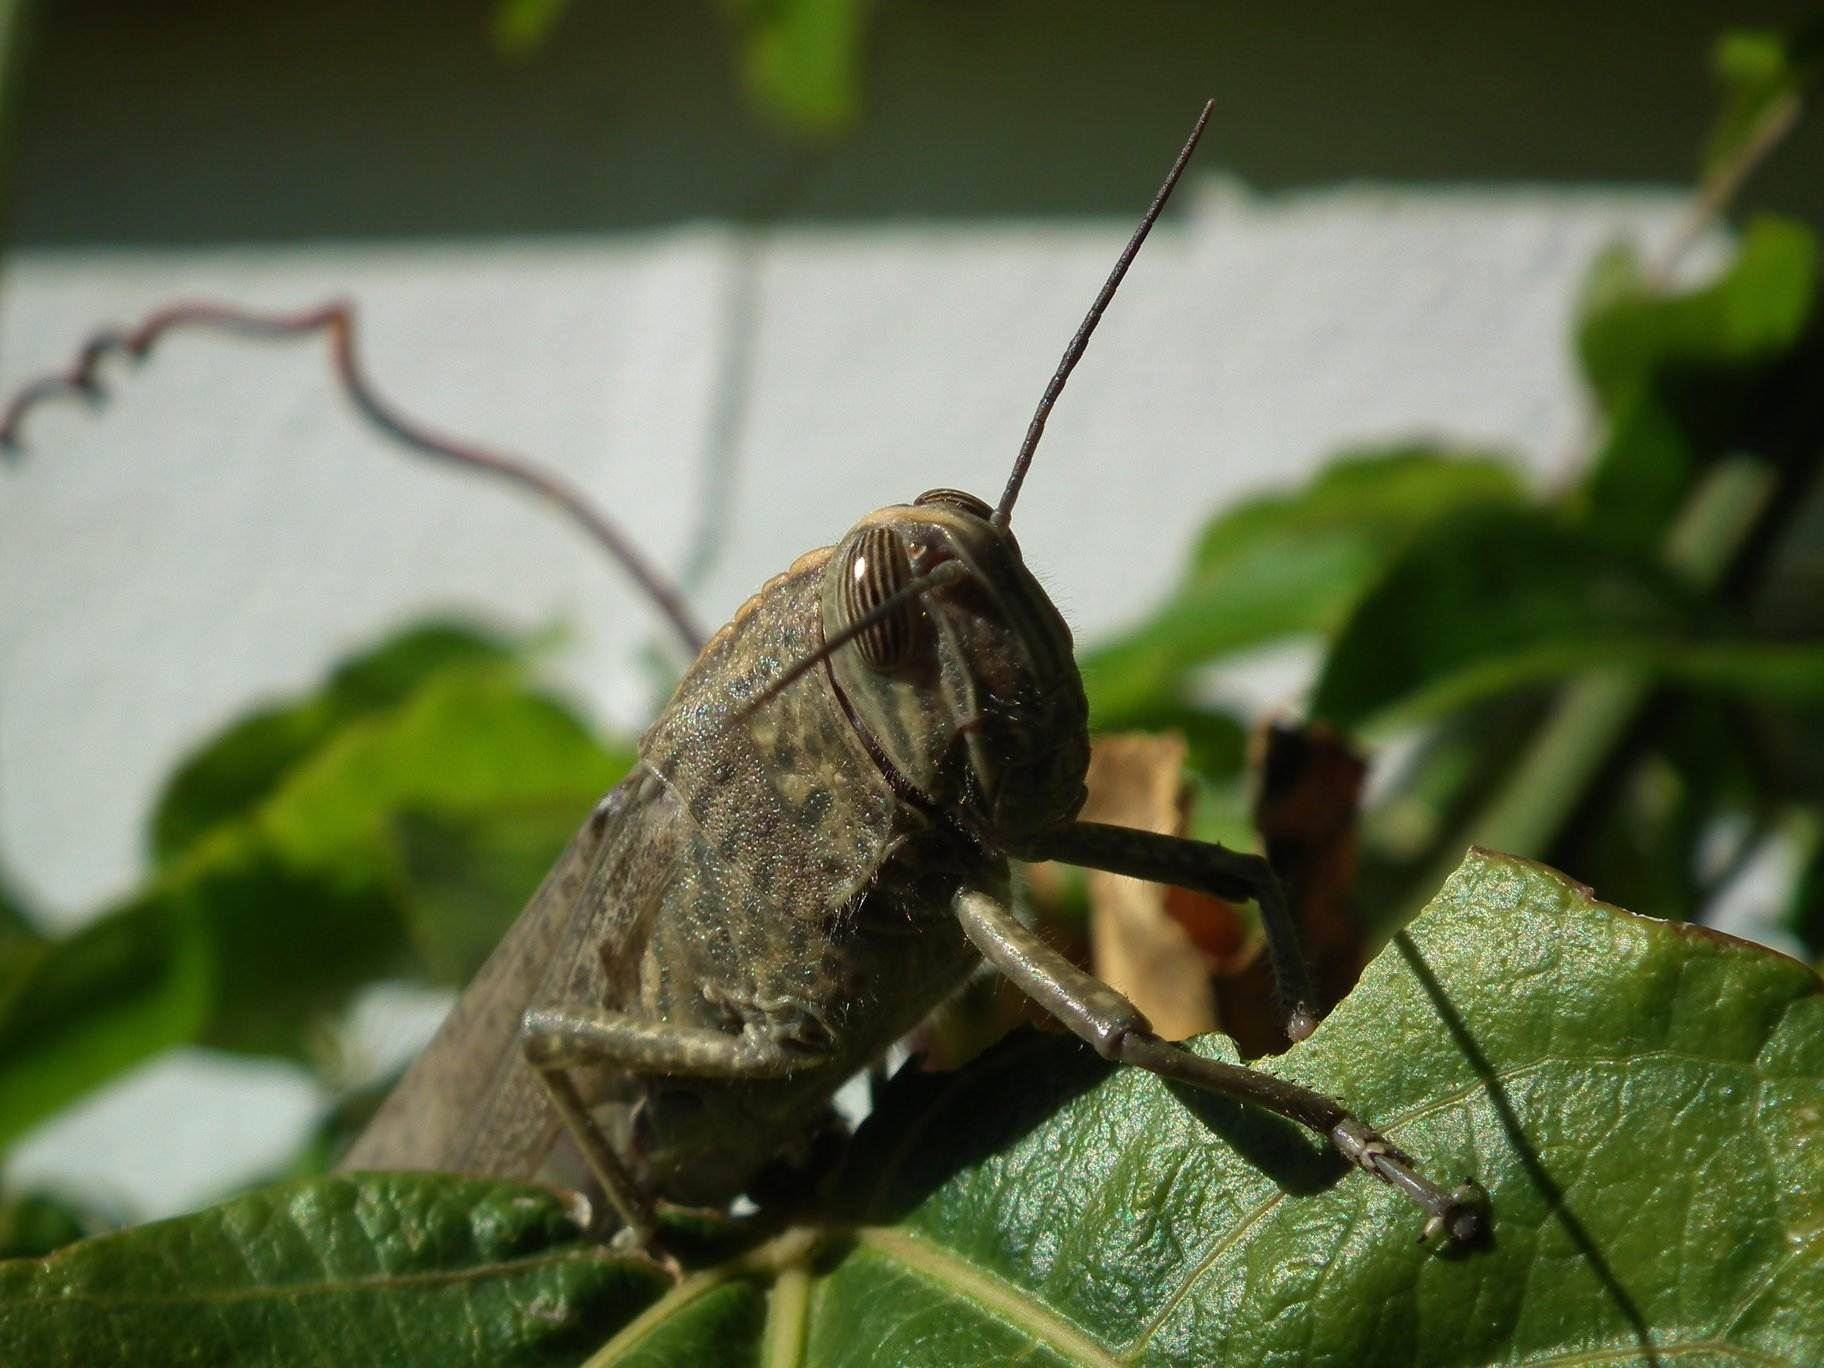 Locust - Insects, Arachnids, Reptiles & Amphibians, Locust | Insect | Winged | Wing | Fly | Leaf | Green